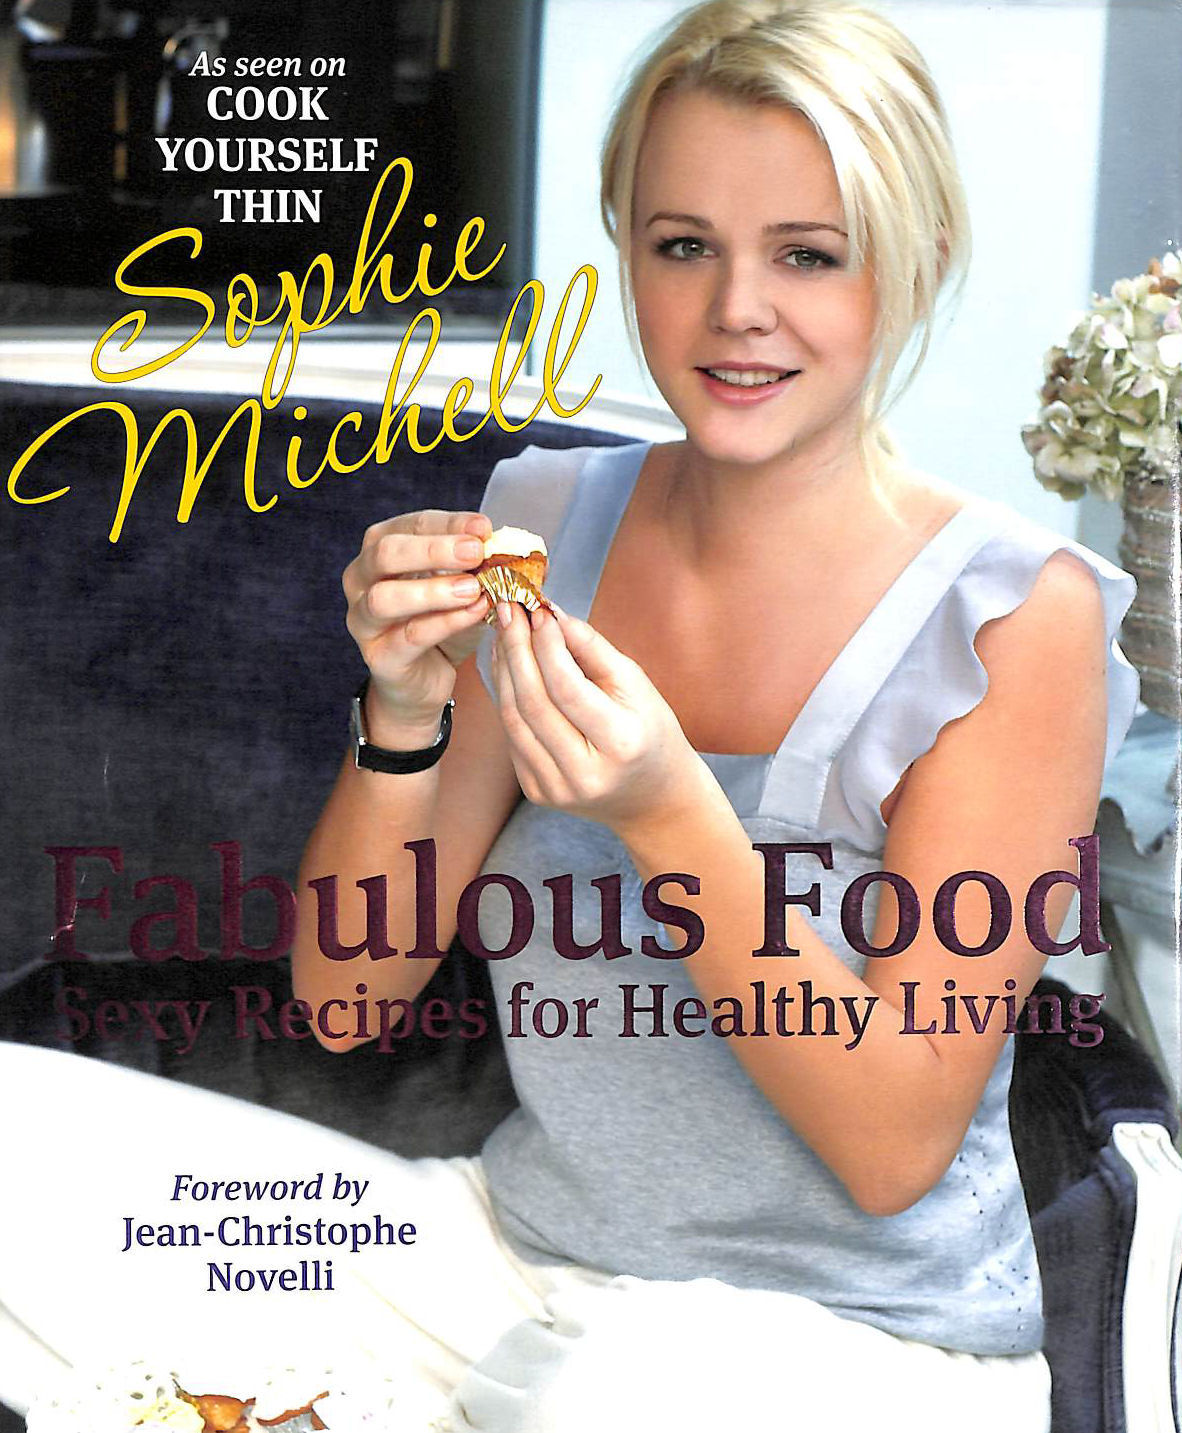 MICHELL, SOPHIE - Fabulous Food: Sexy Recipes for Healthy Living